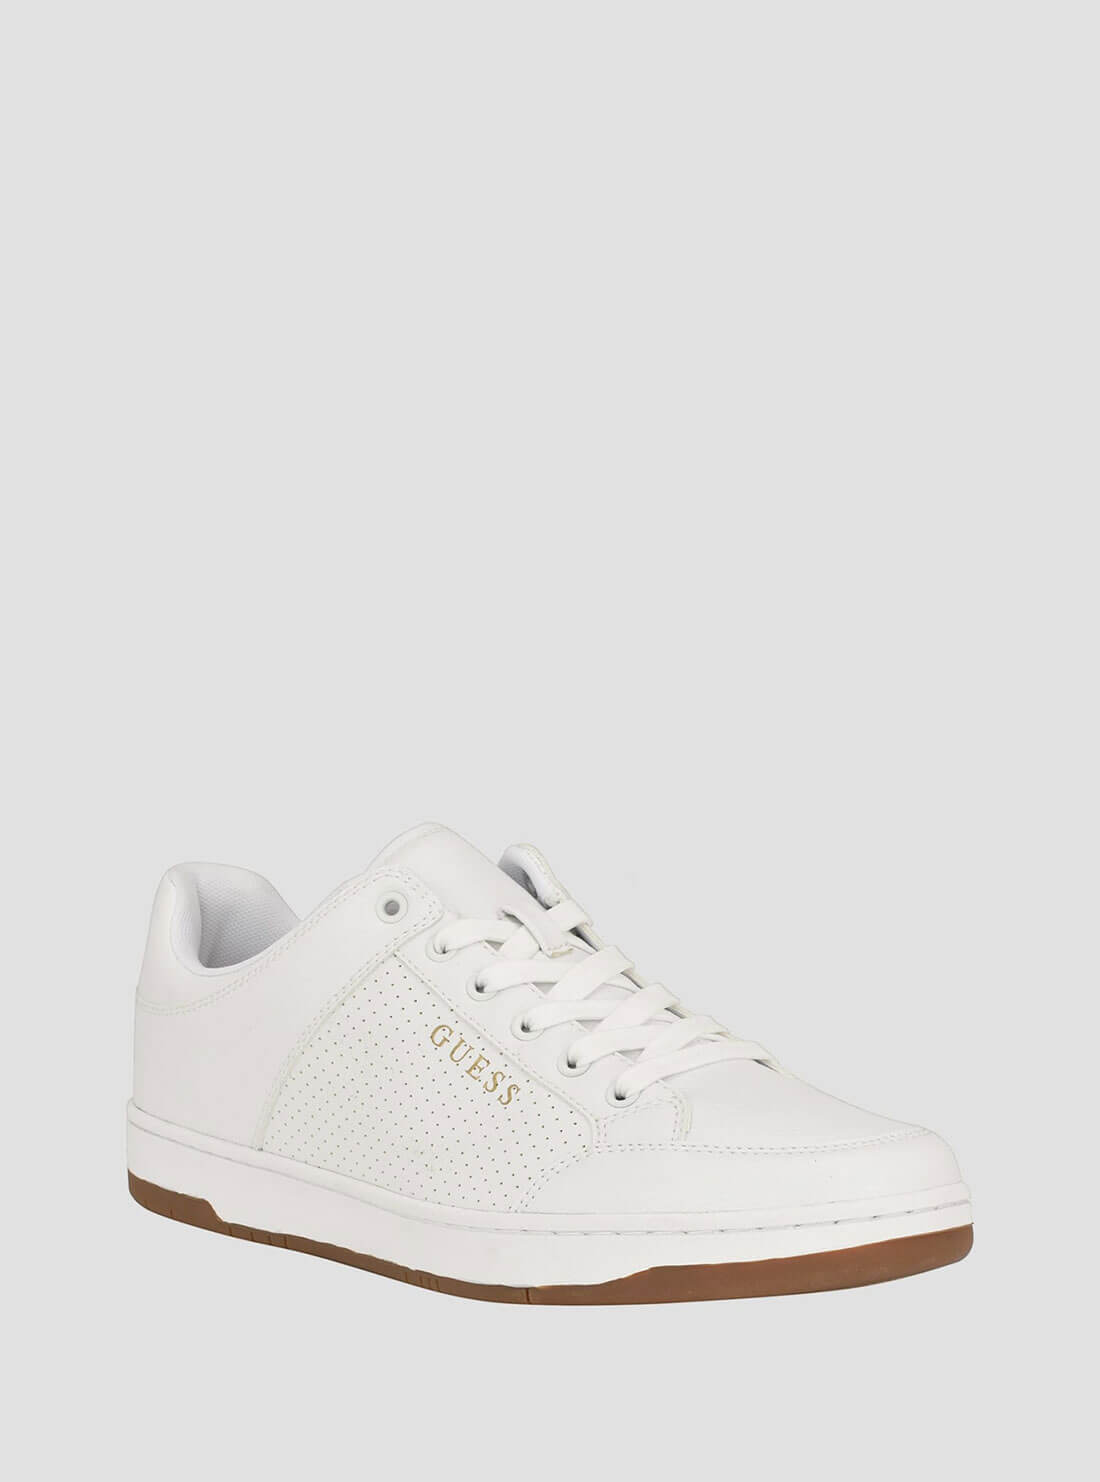 White Tempo Sneakers | GUESS Men's Shoes | front view